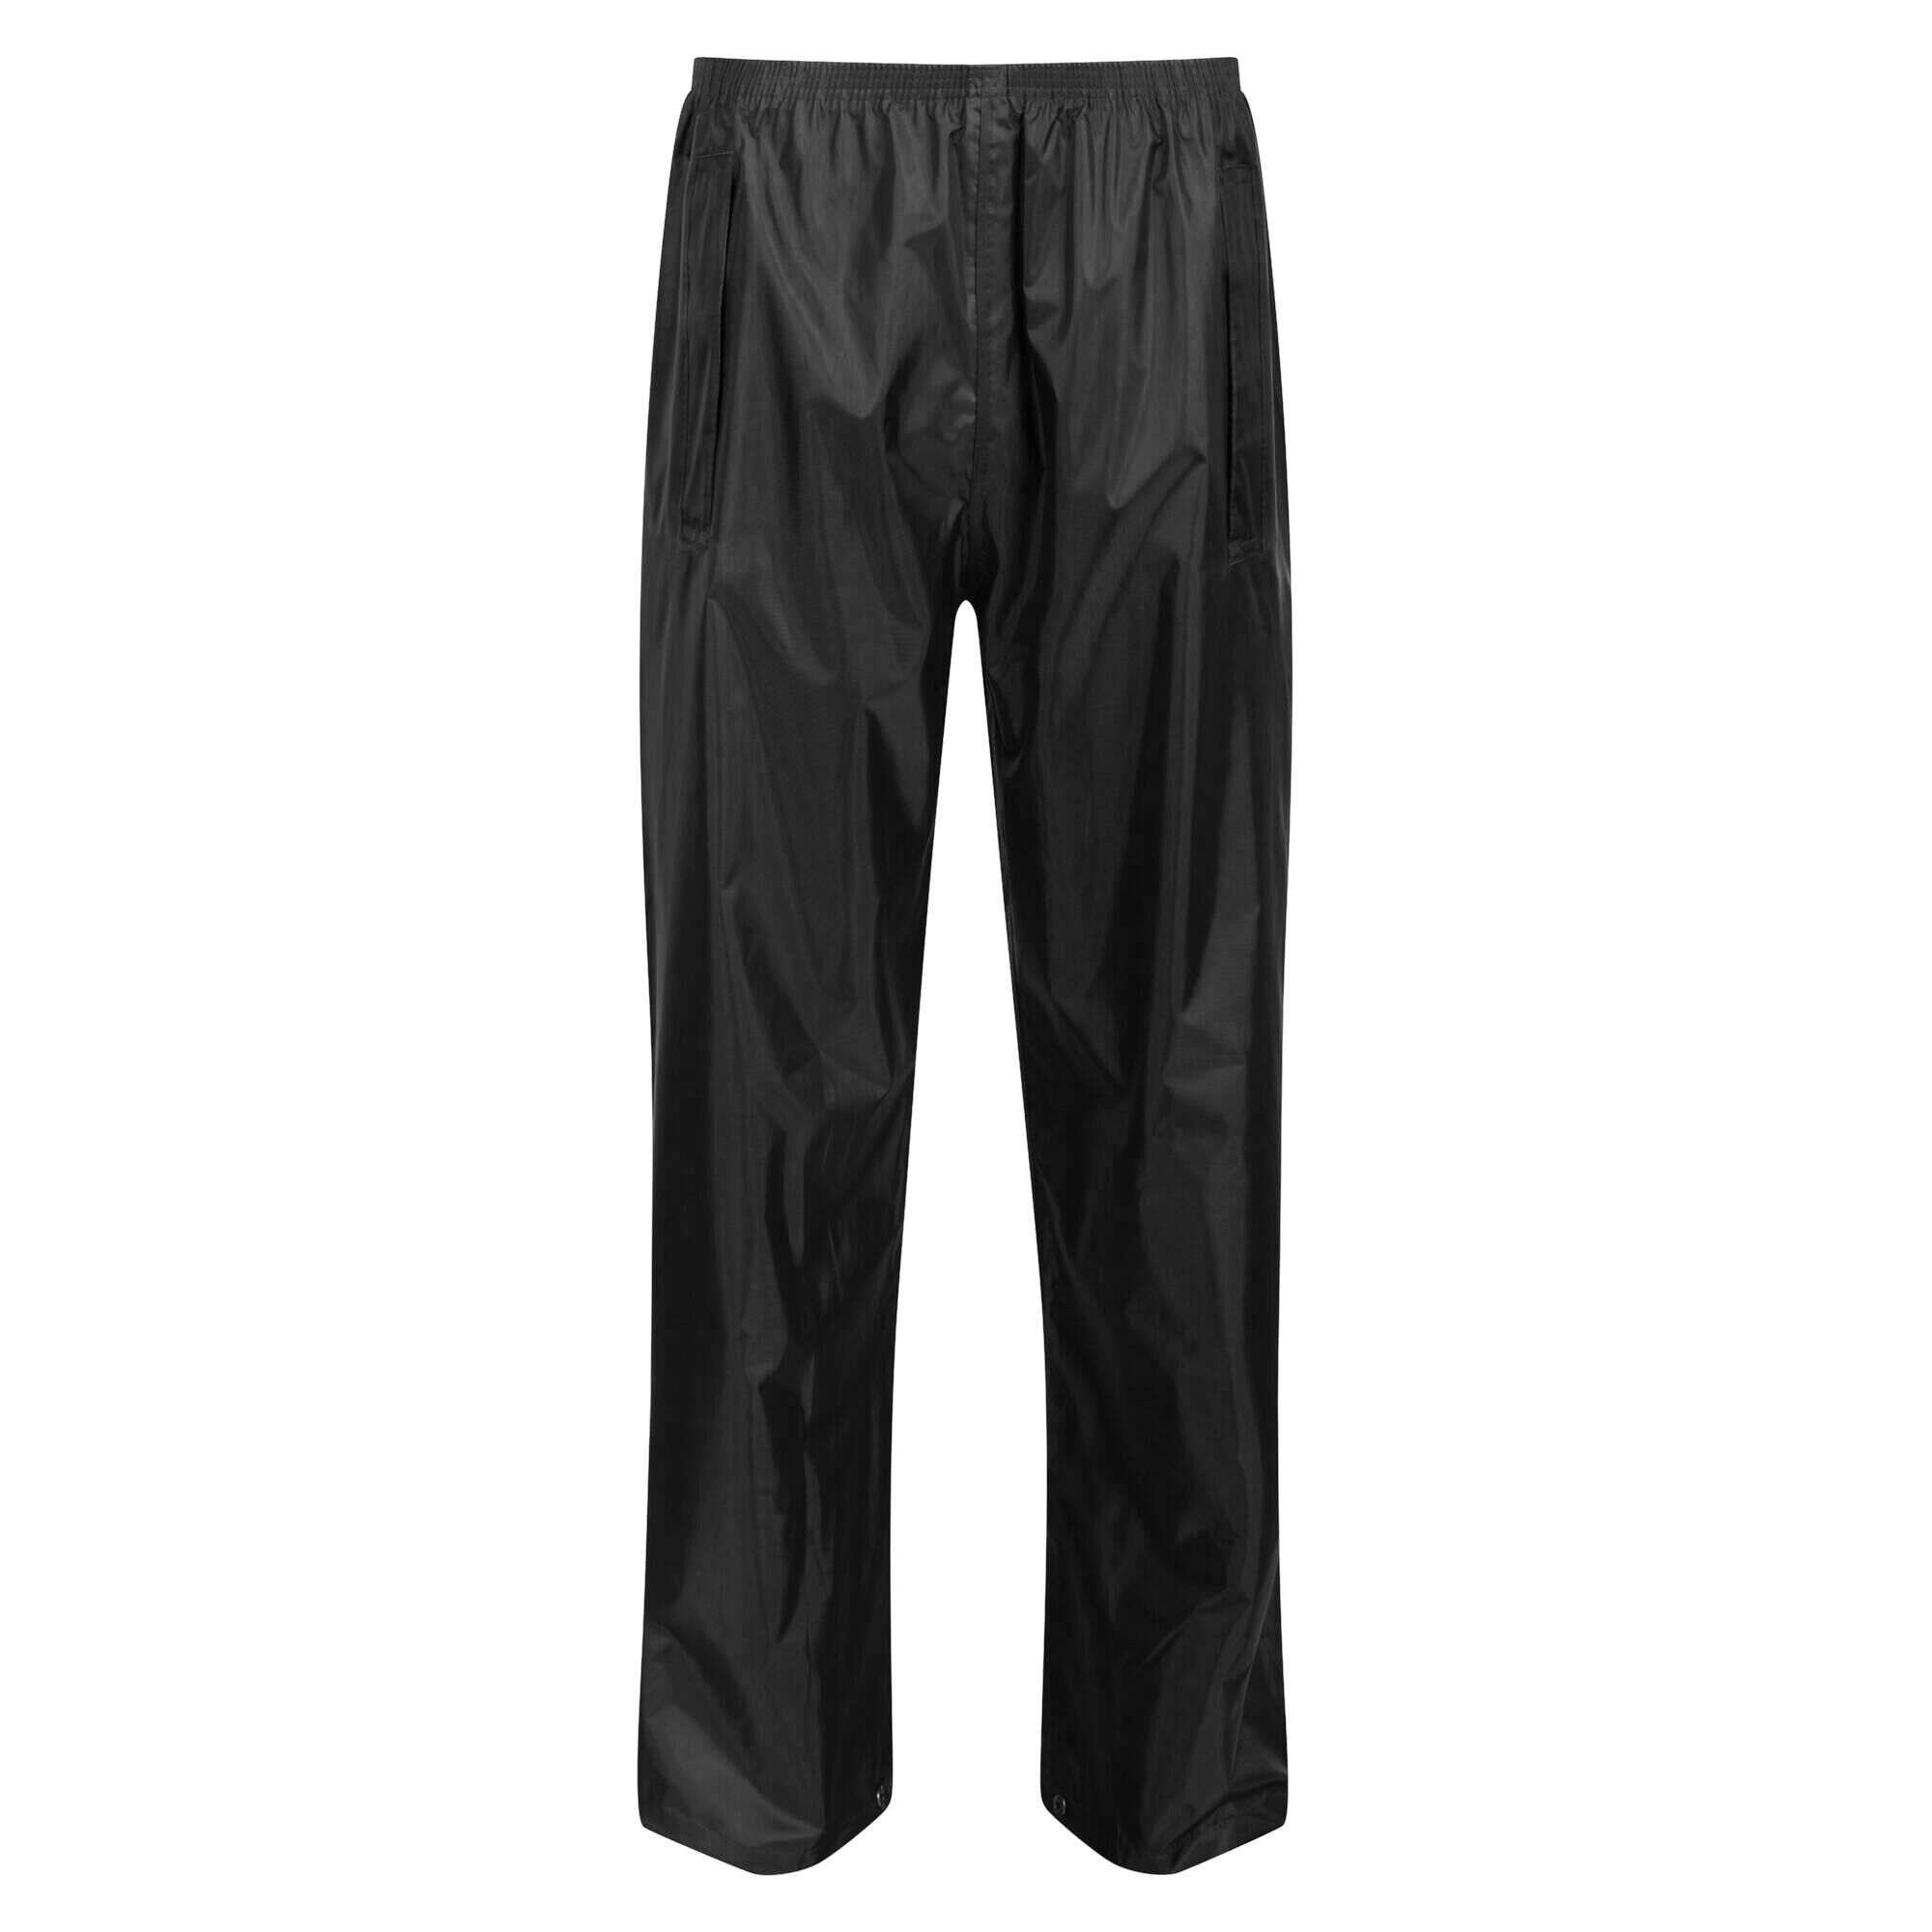 Mac In A Sac Packable Unisex Adults Waterproof Overtrousers/Pant Navy XXXL